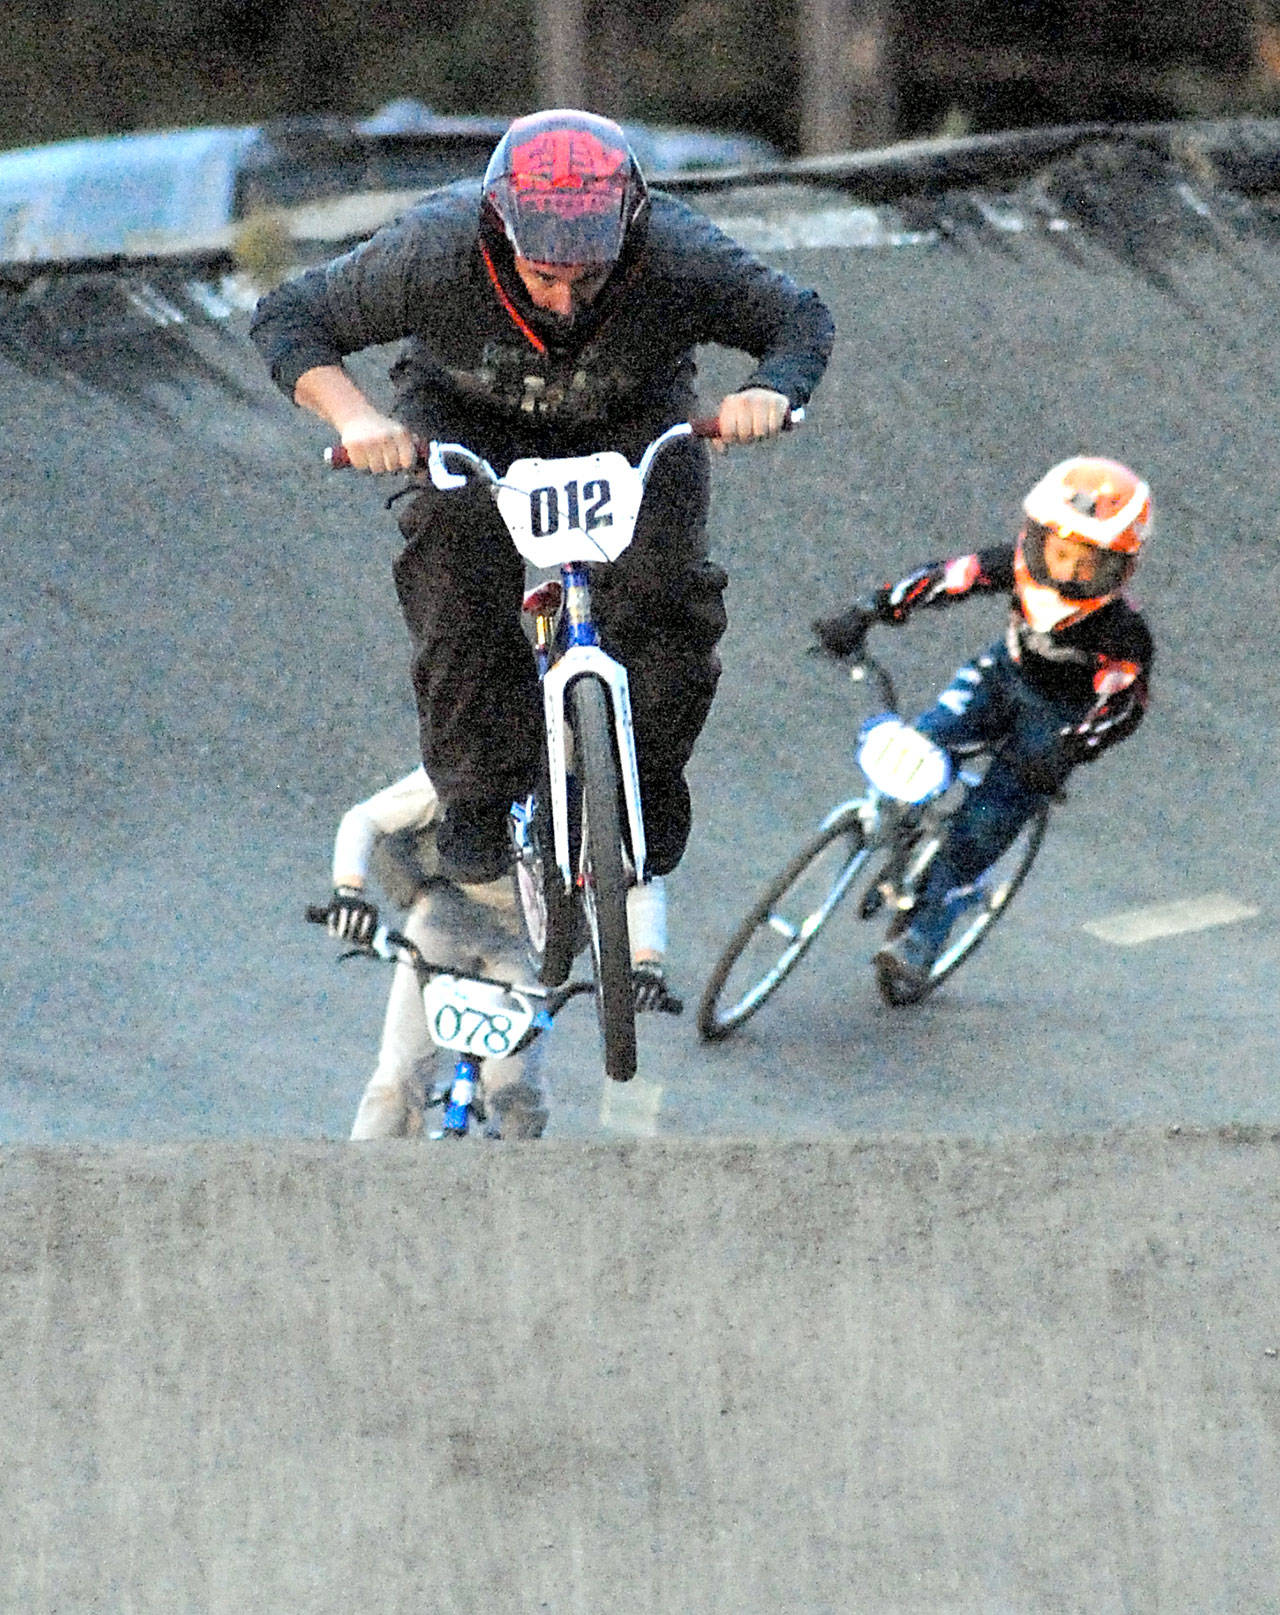 Keith Thorpe/Peninsula Daily News Aaron Petersen (012) of Port Angeles leads Sam Brown (078) of Port Angeles in the novice category at the Lincoln Park BMX Track on Thursday night under the track’s new lights. The track is back open for competition.